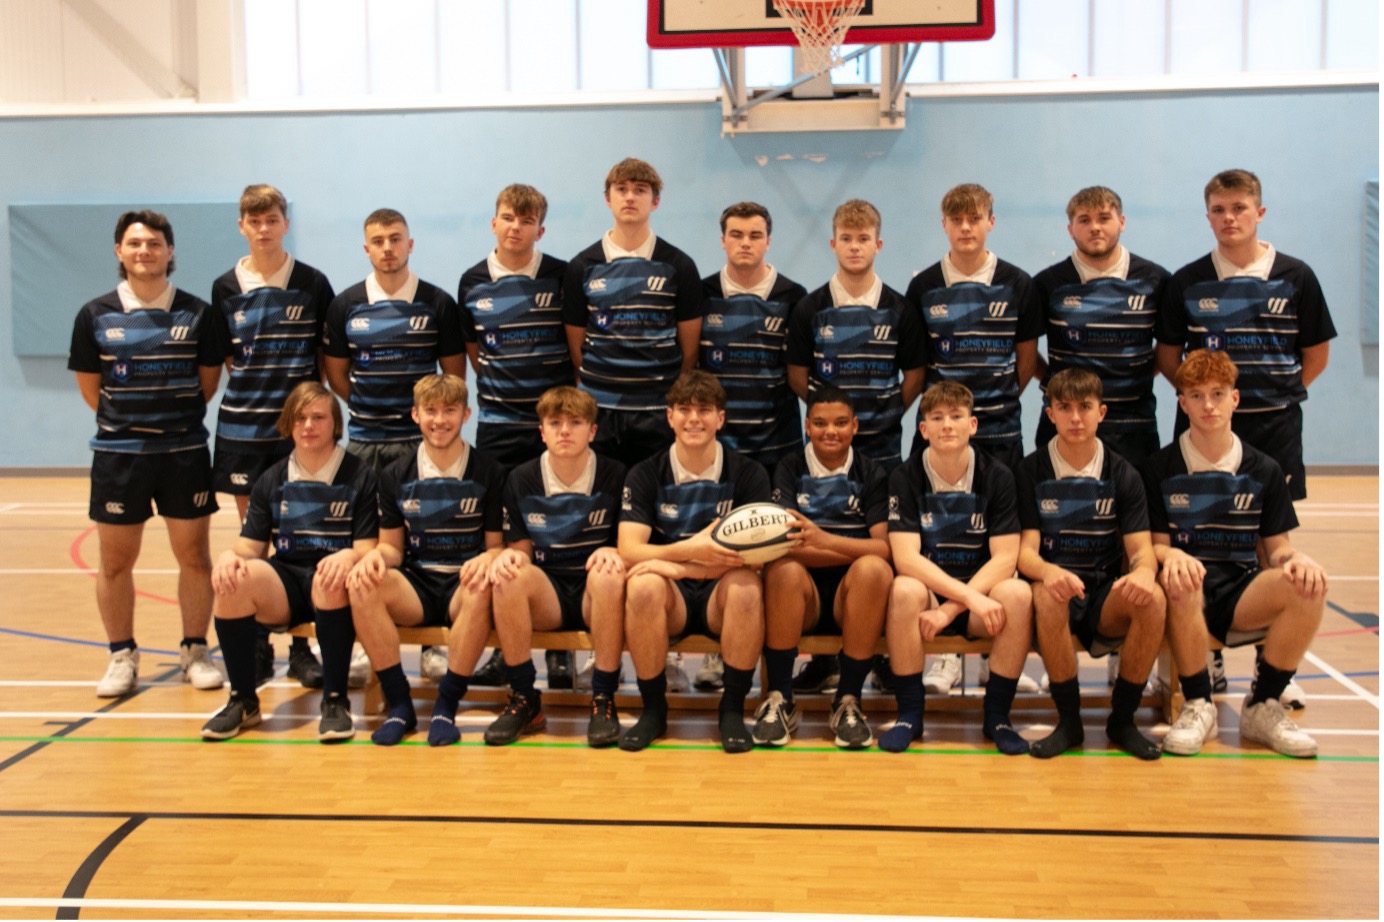 Weston sport boys rugby team picture in sports hall